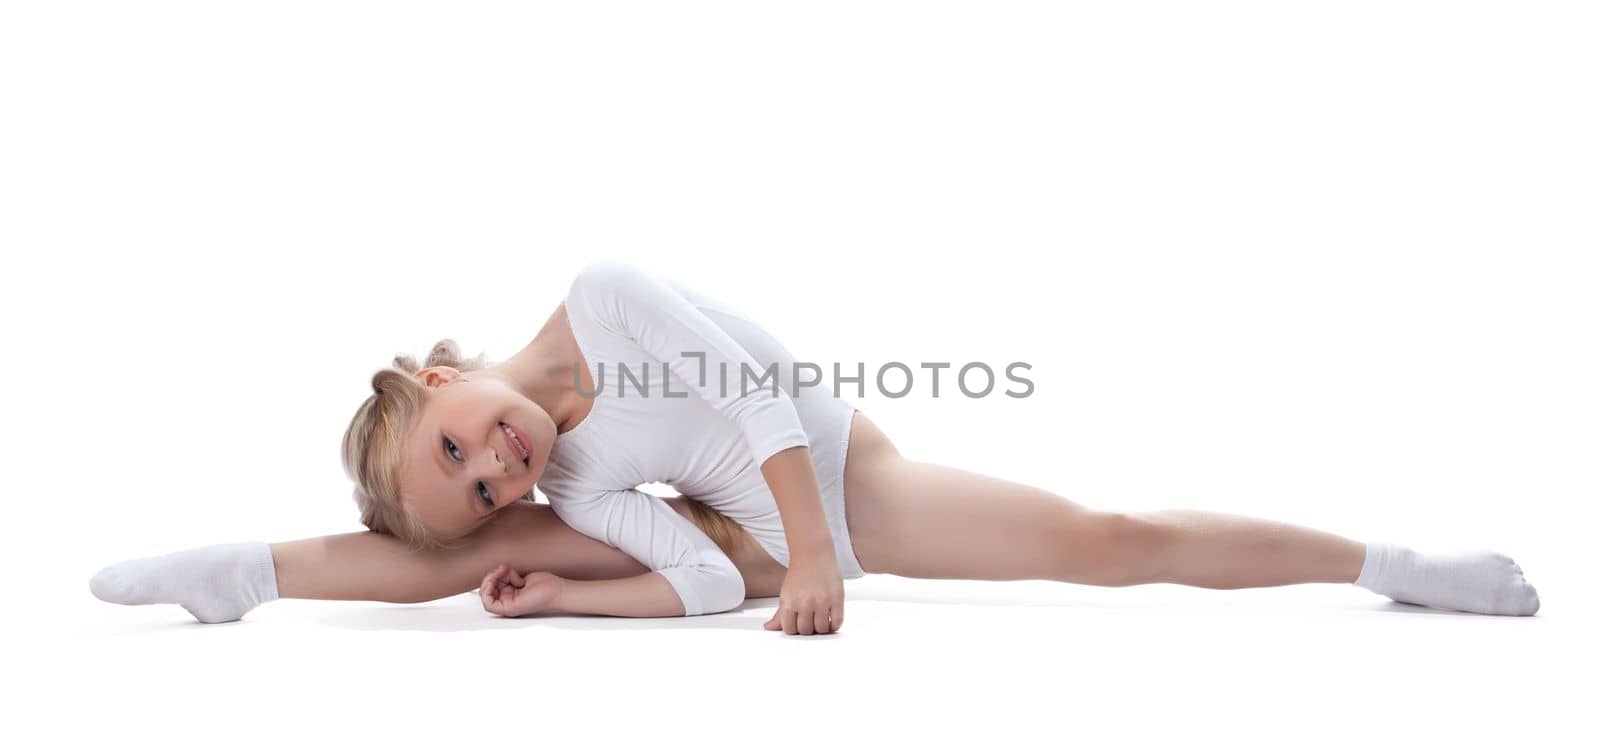 Girl performing gymnastic exercises by rivertime